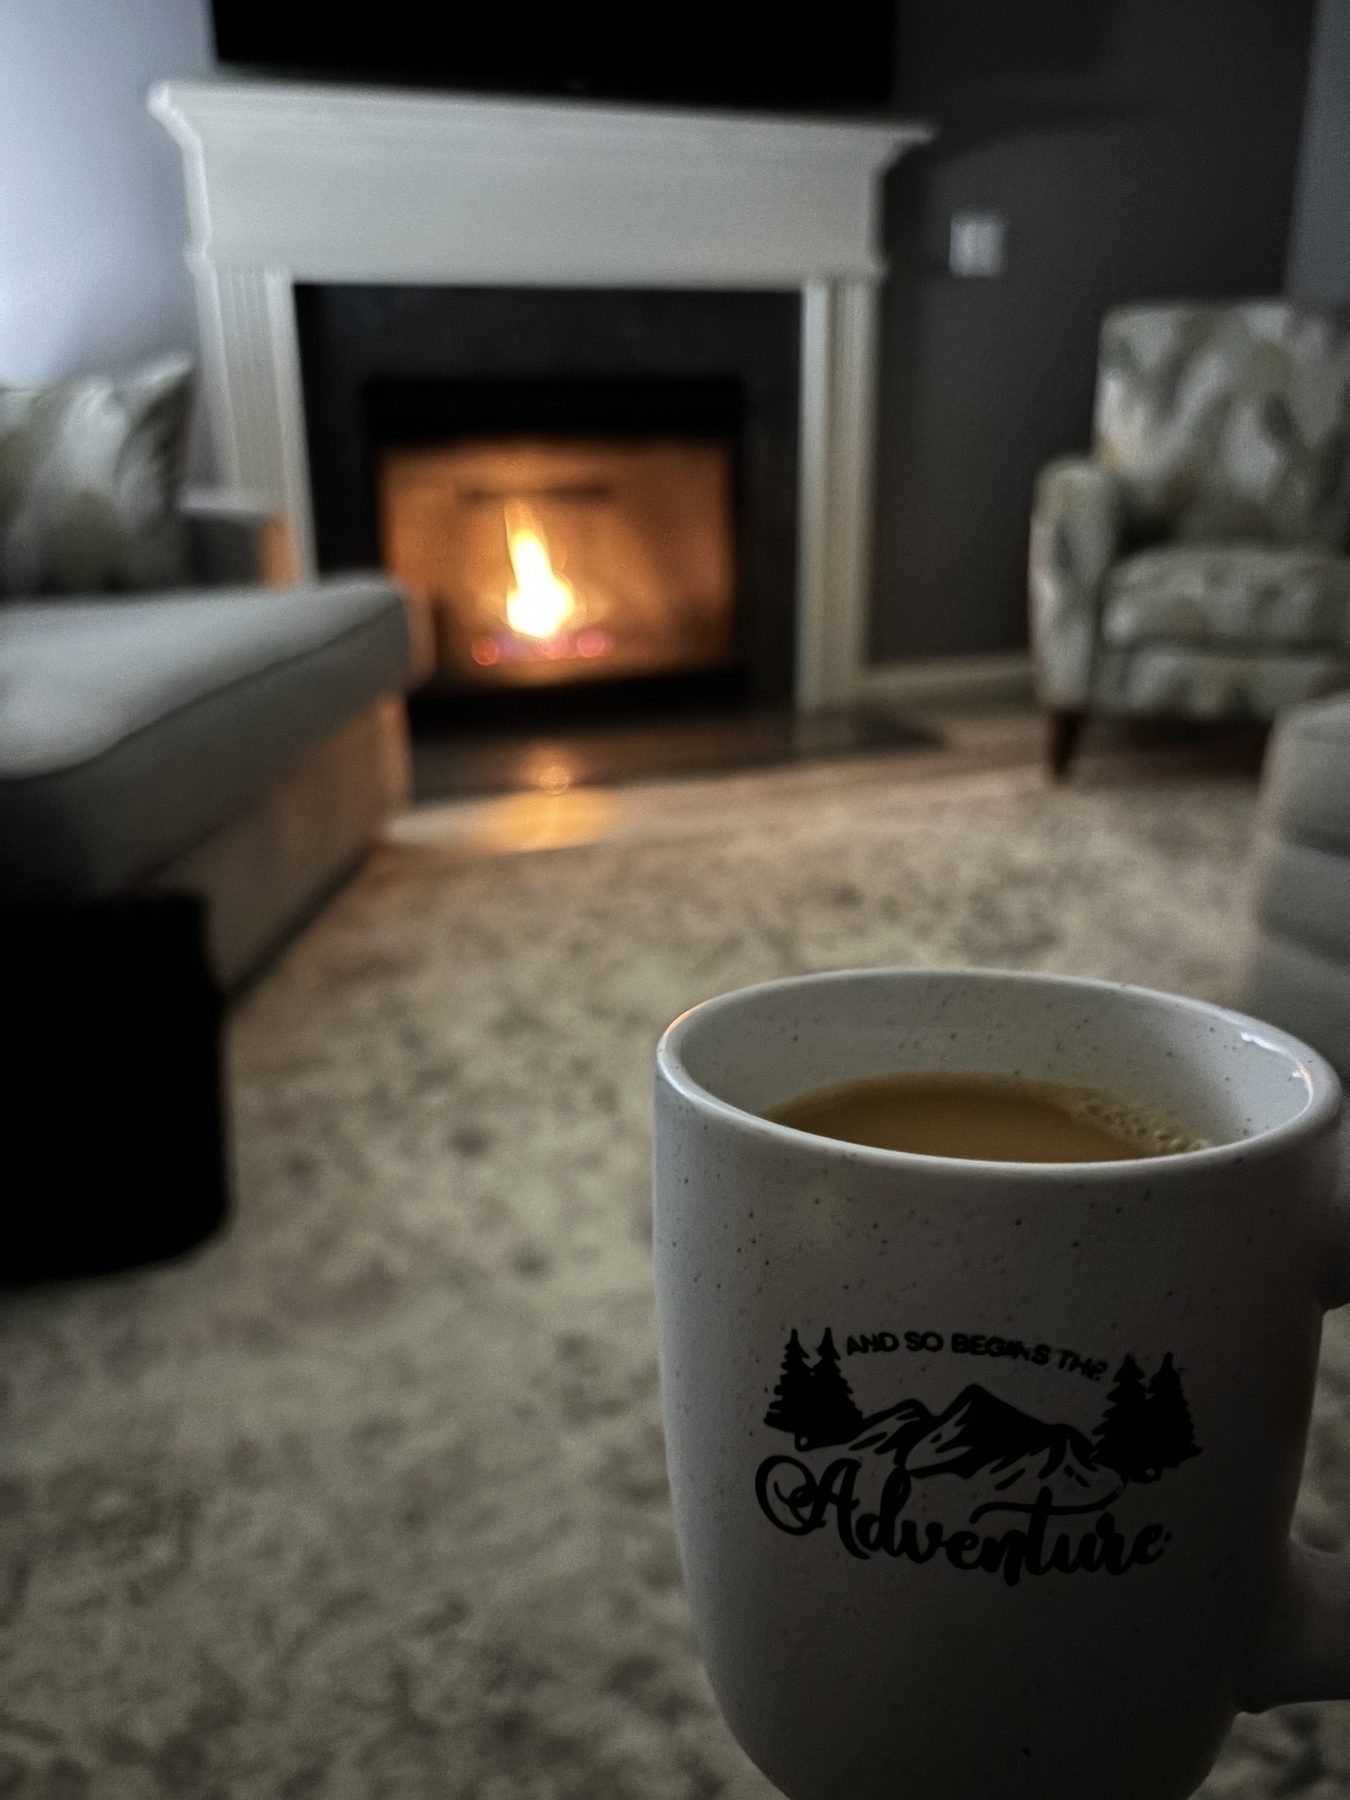 A coffee mug that reads, “Let the adventure begin” in front of a fire place